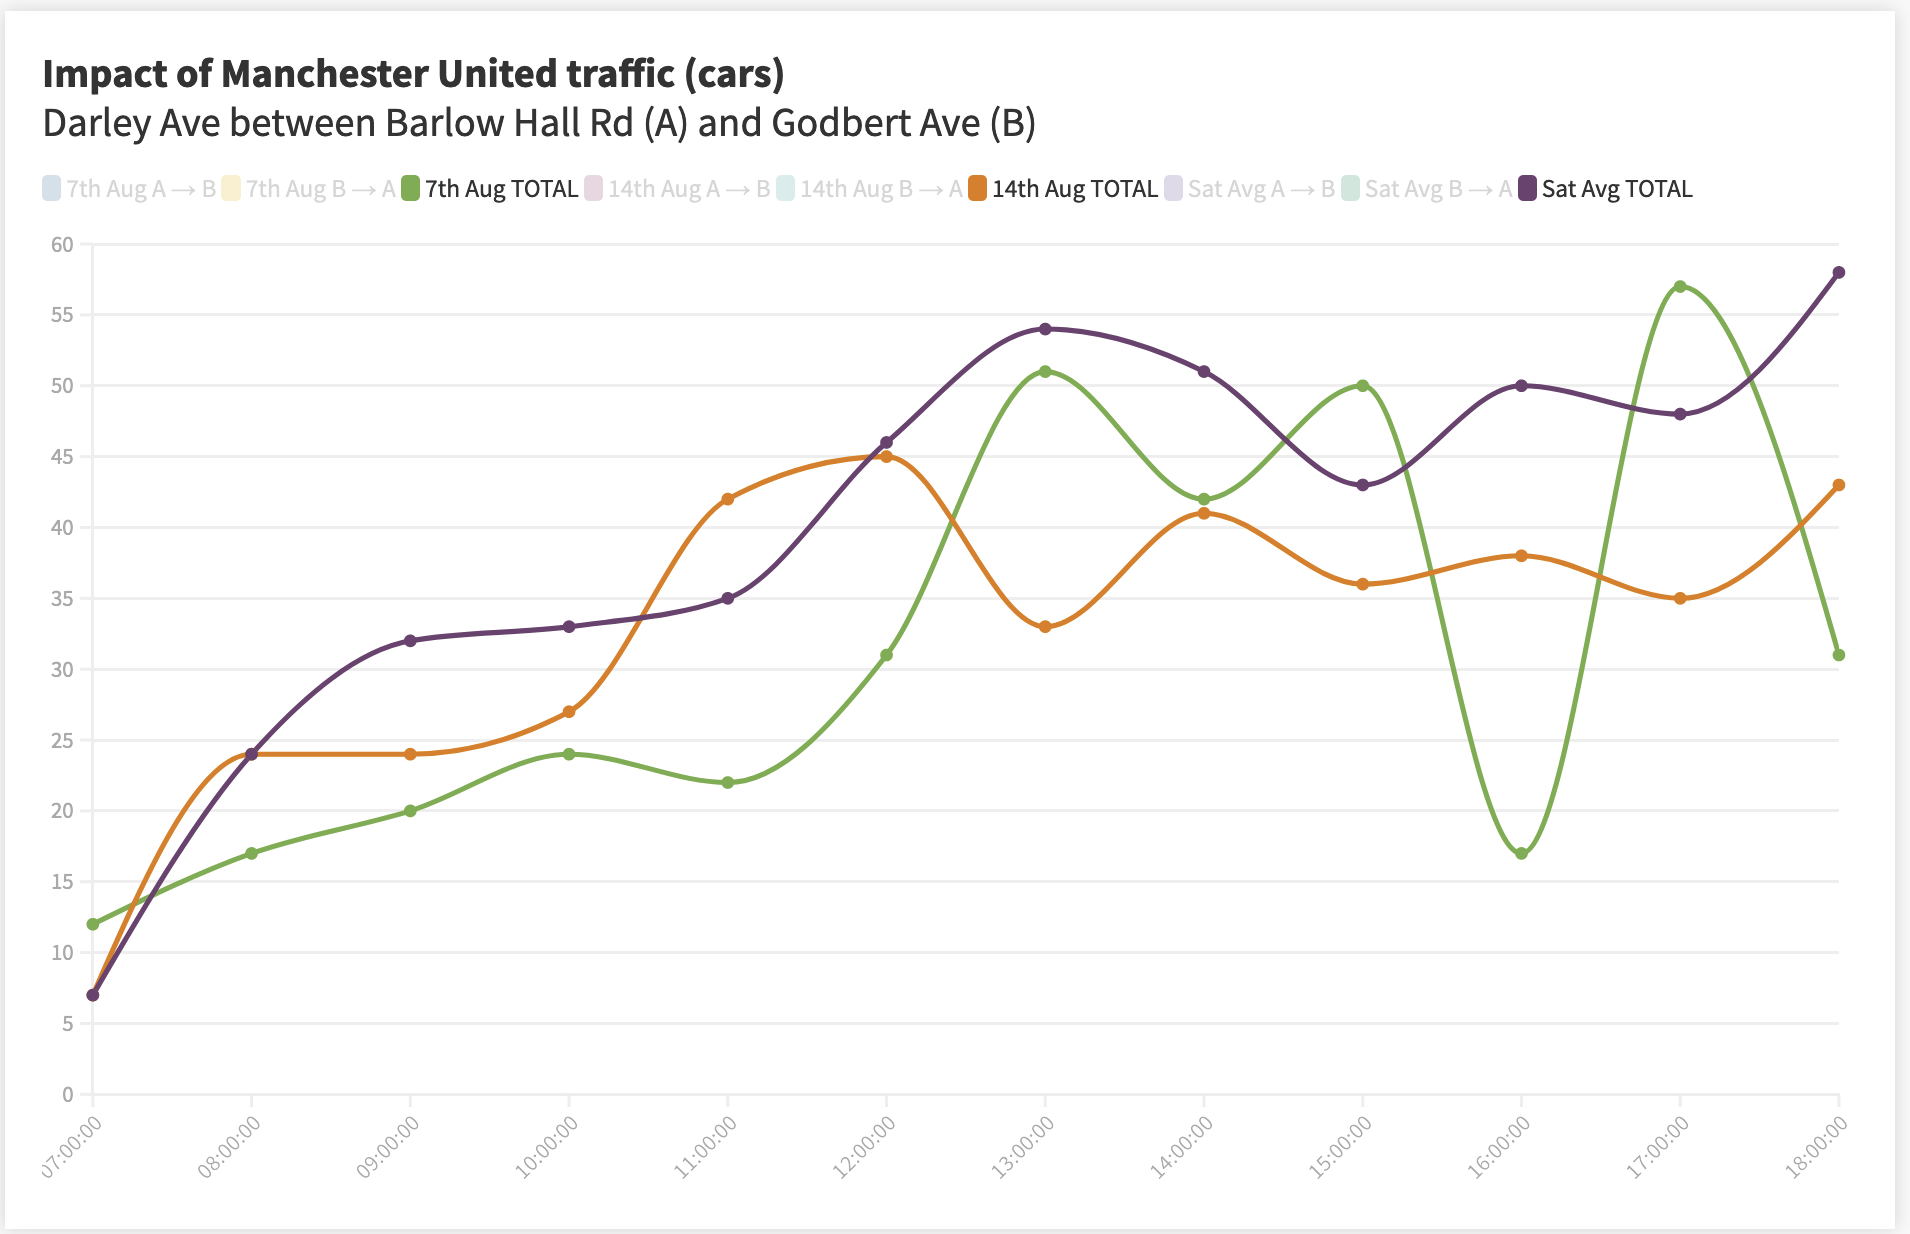 A graph showing the impact of Manchester United football traffic on Darley Avenue